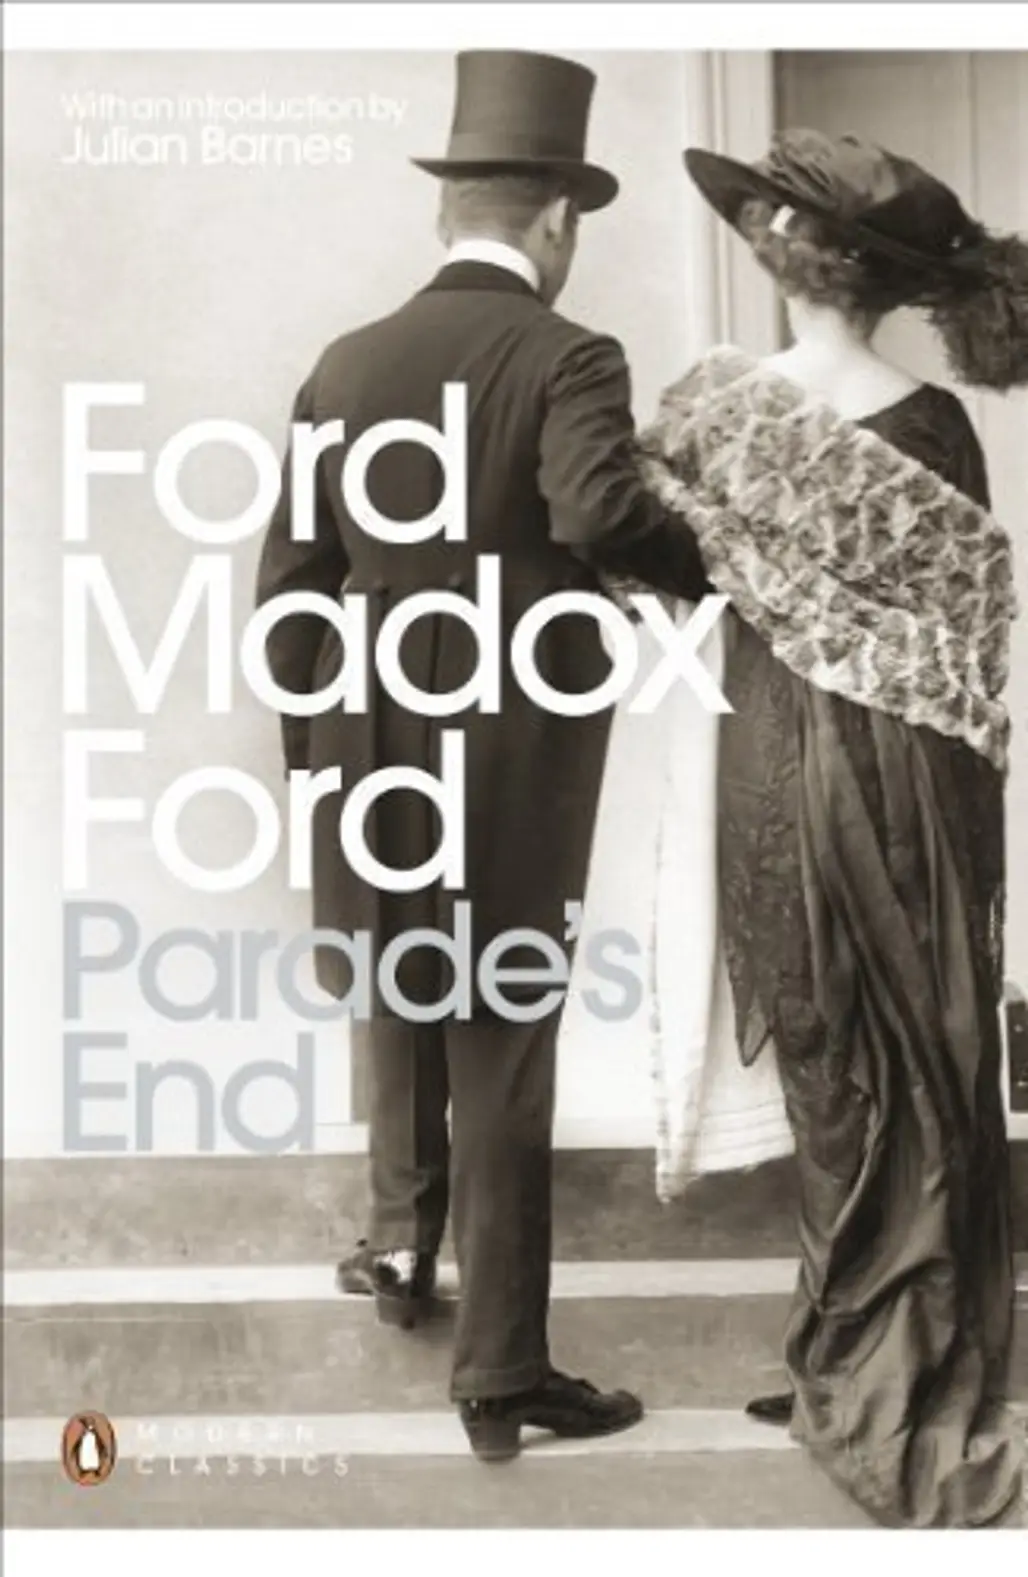 Parade’s End by Ford Madox Ford (1924 – 1928)